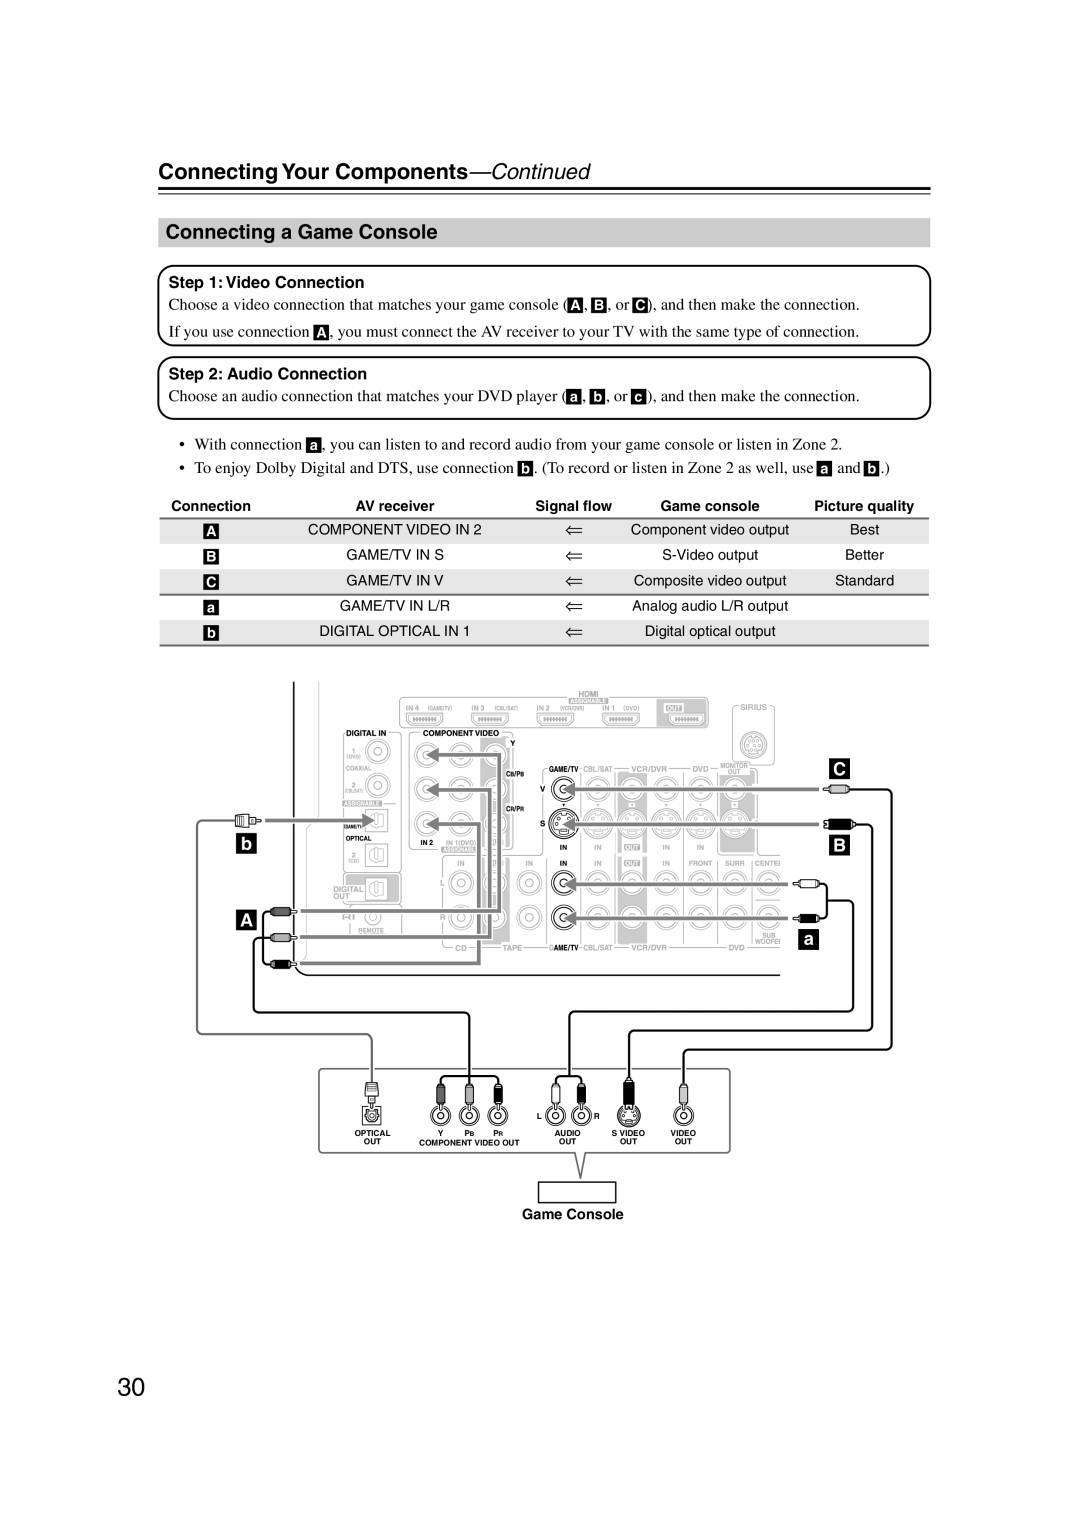 Integra DTR-5.9 instruction manual Connecting a Game Console, Connecting Your Components—Continued 